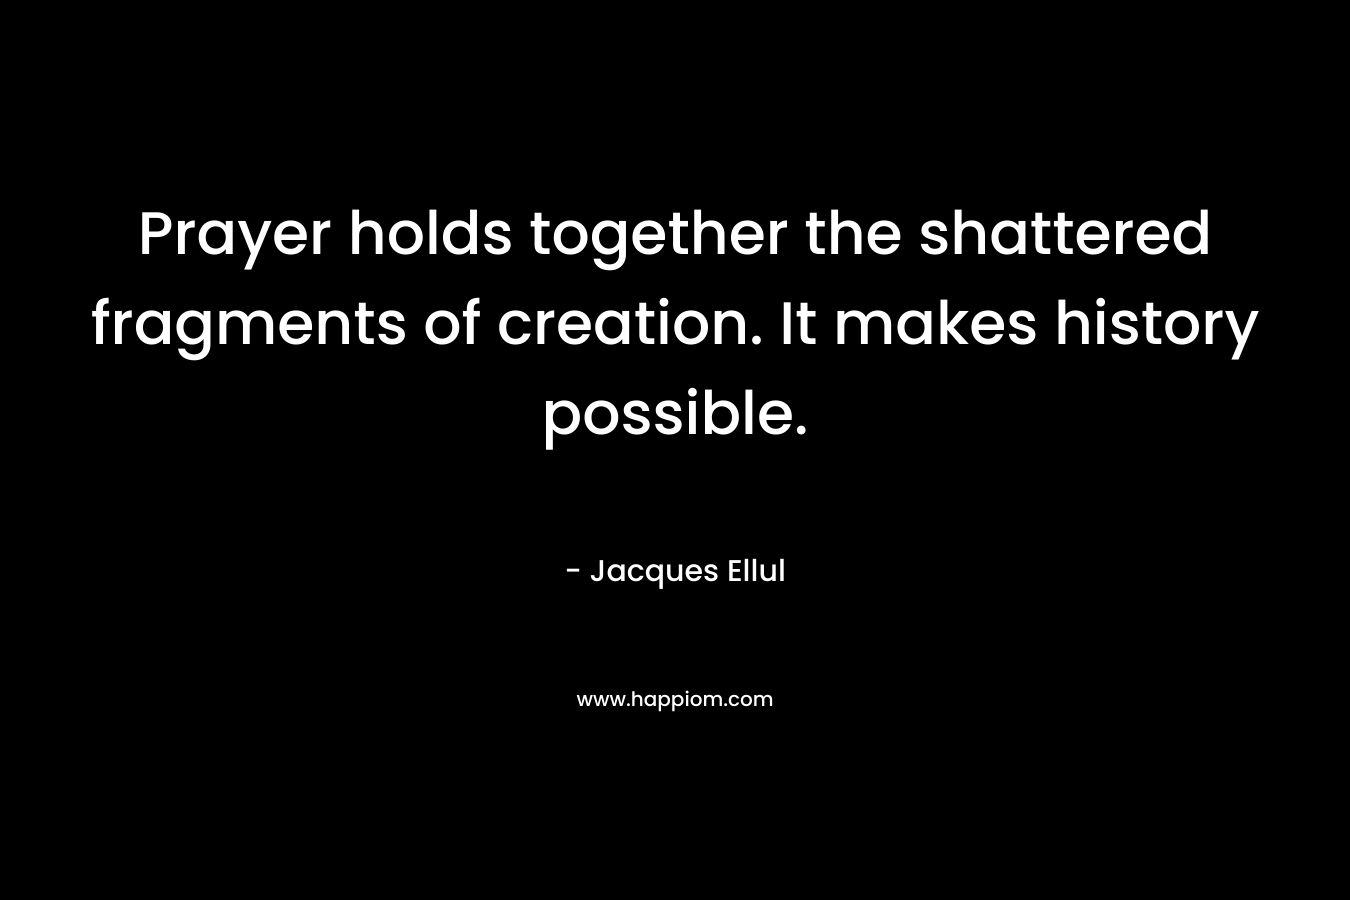 Prayer holds together the shattered fragments of creation. It makes history possible.